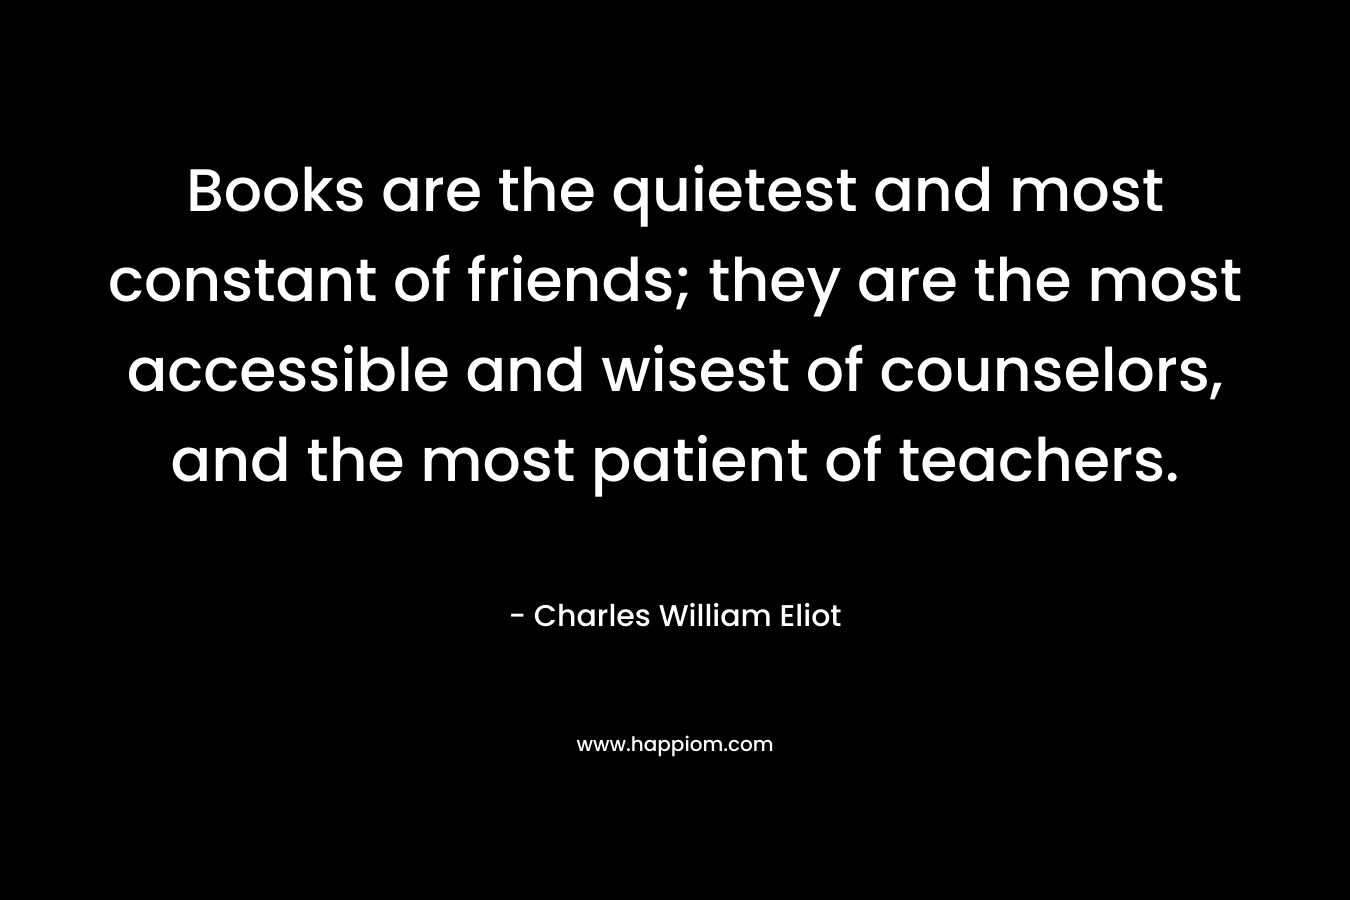 Books are the quietest and most constant of friends; they are the most accessible and wisest of counselors, and the most patient of teachers.